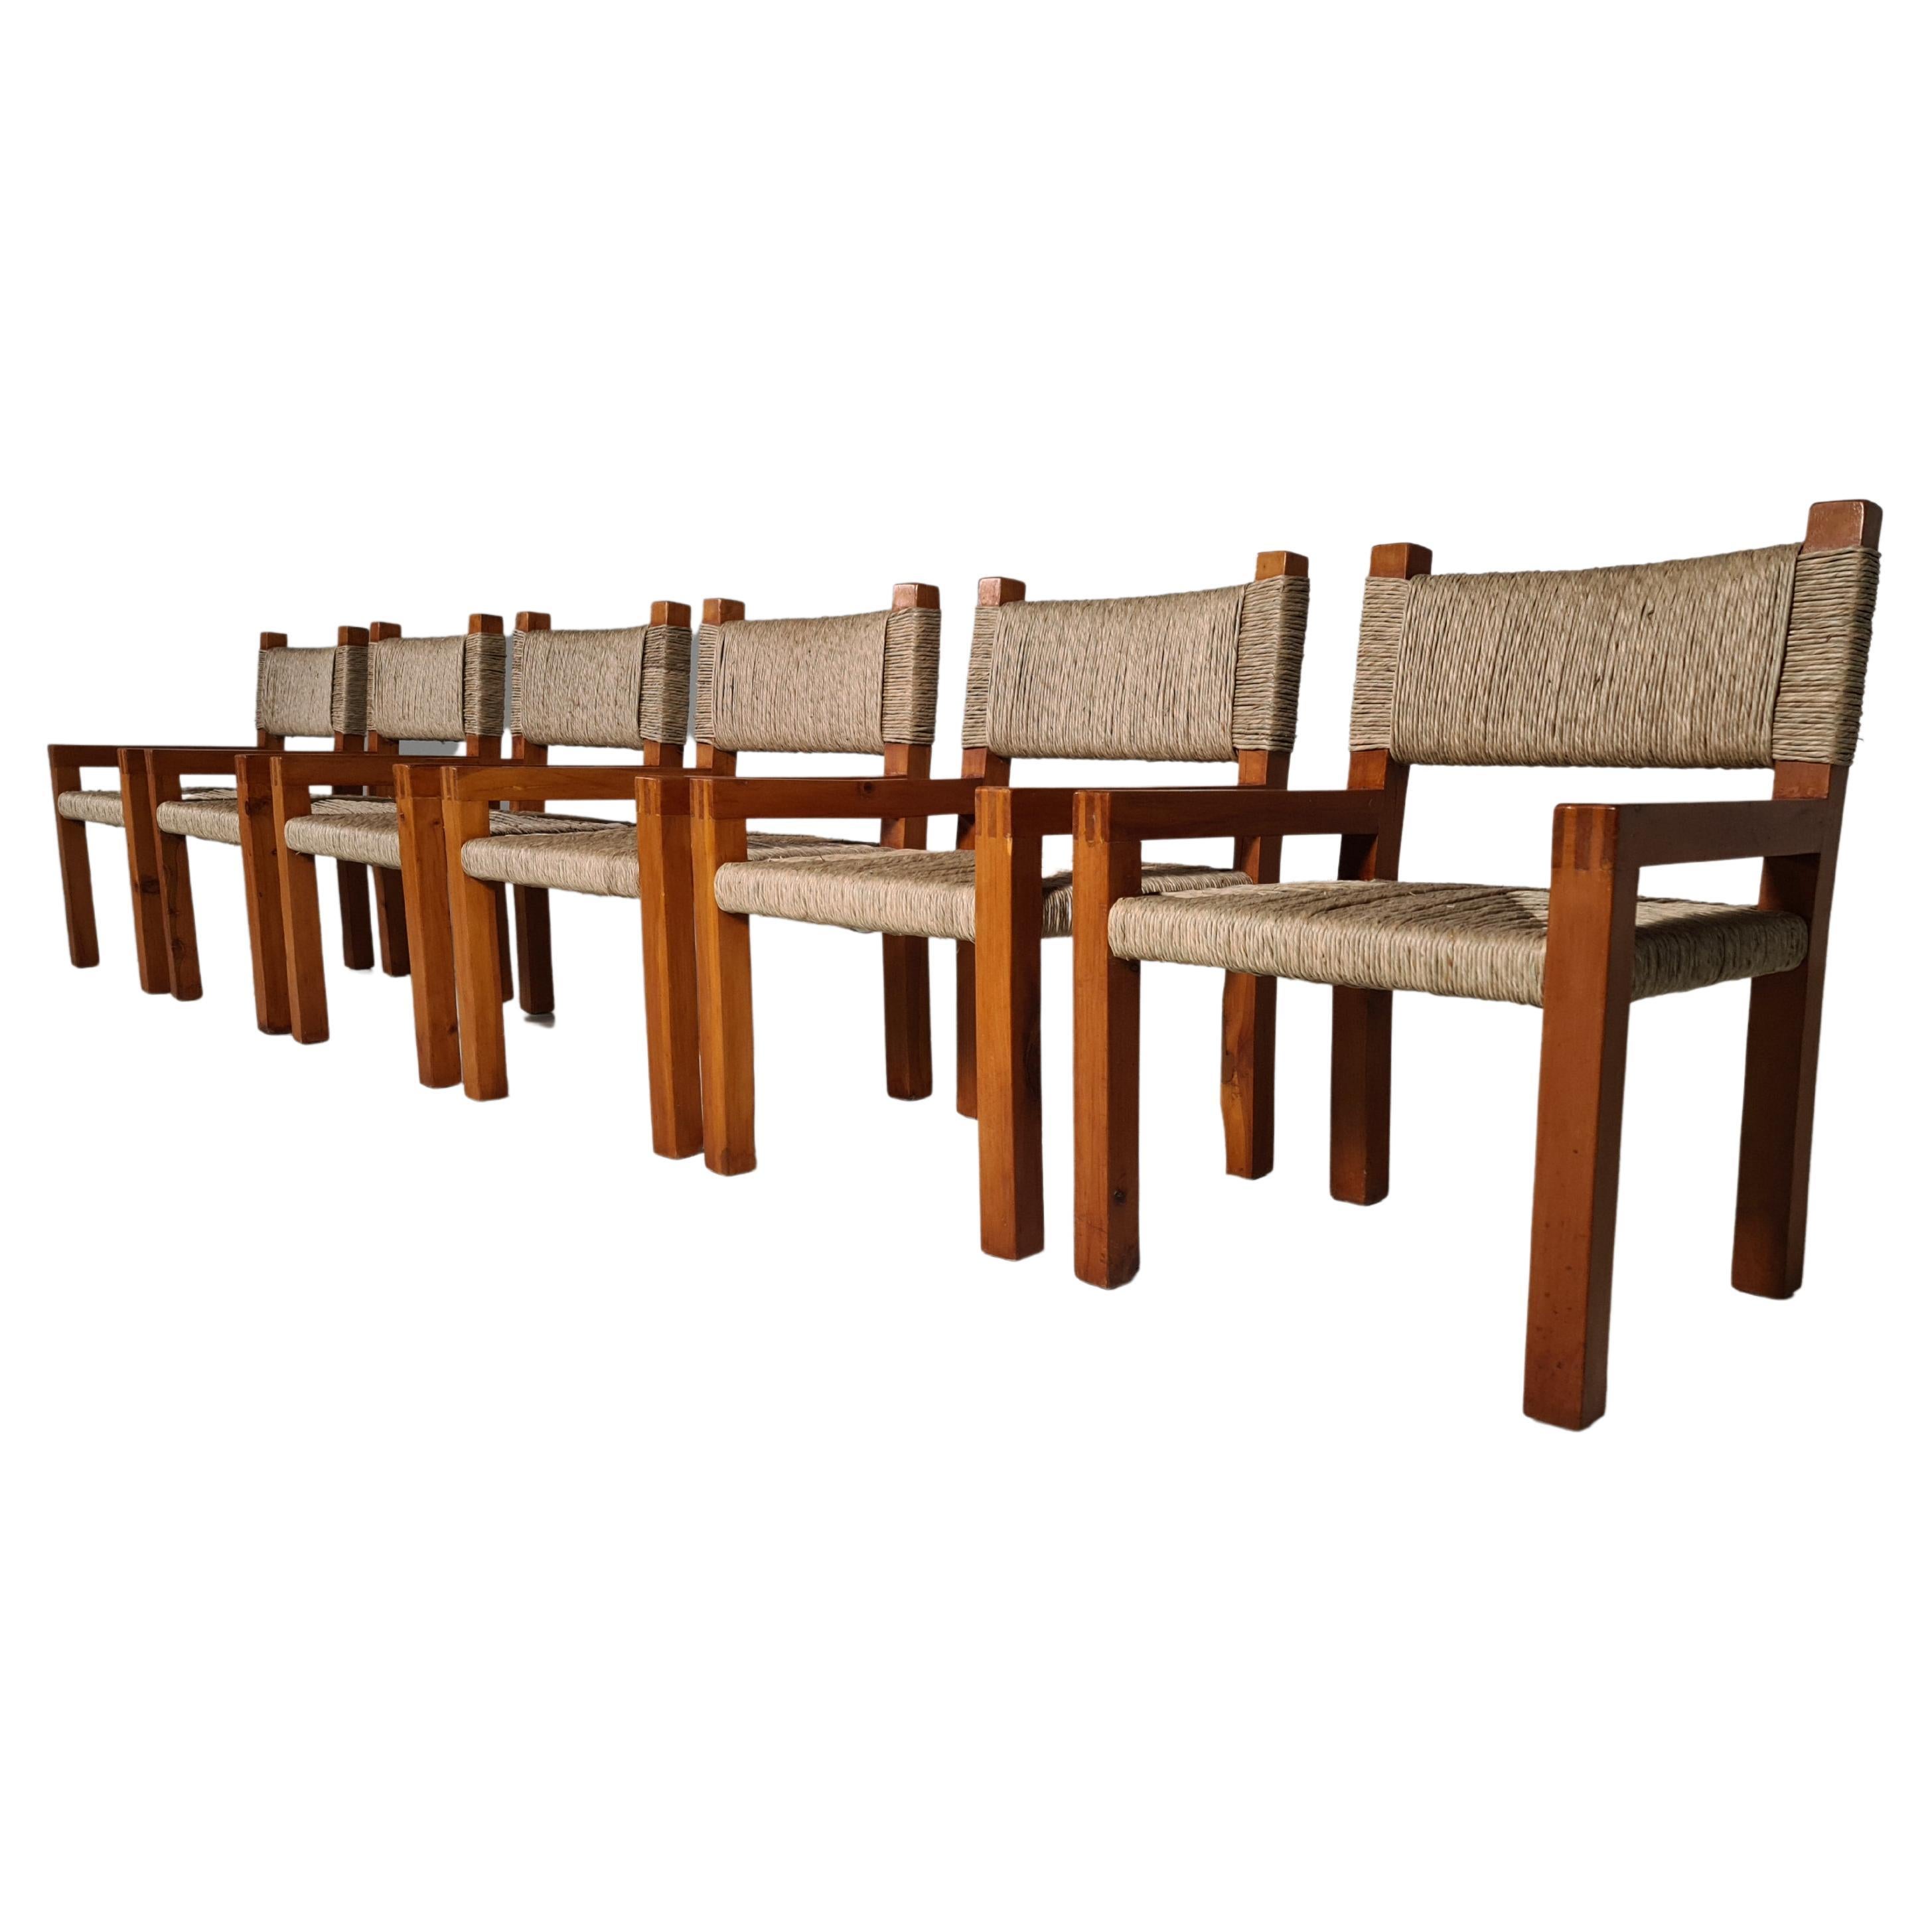 Set of 6 Brutalist Pine Wood Dining Chairs, France, 1960s